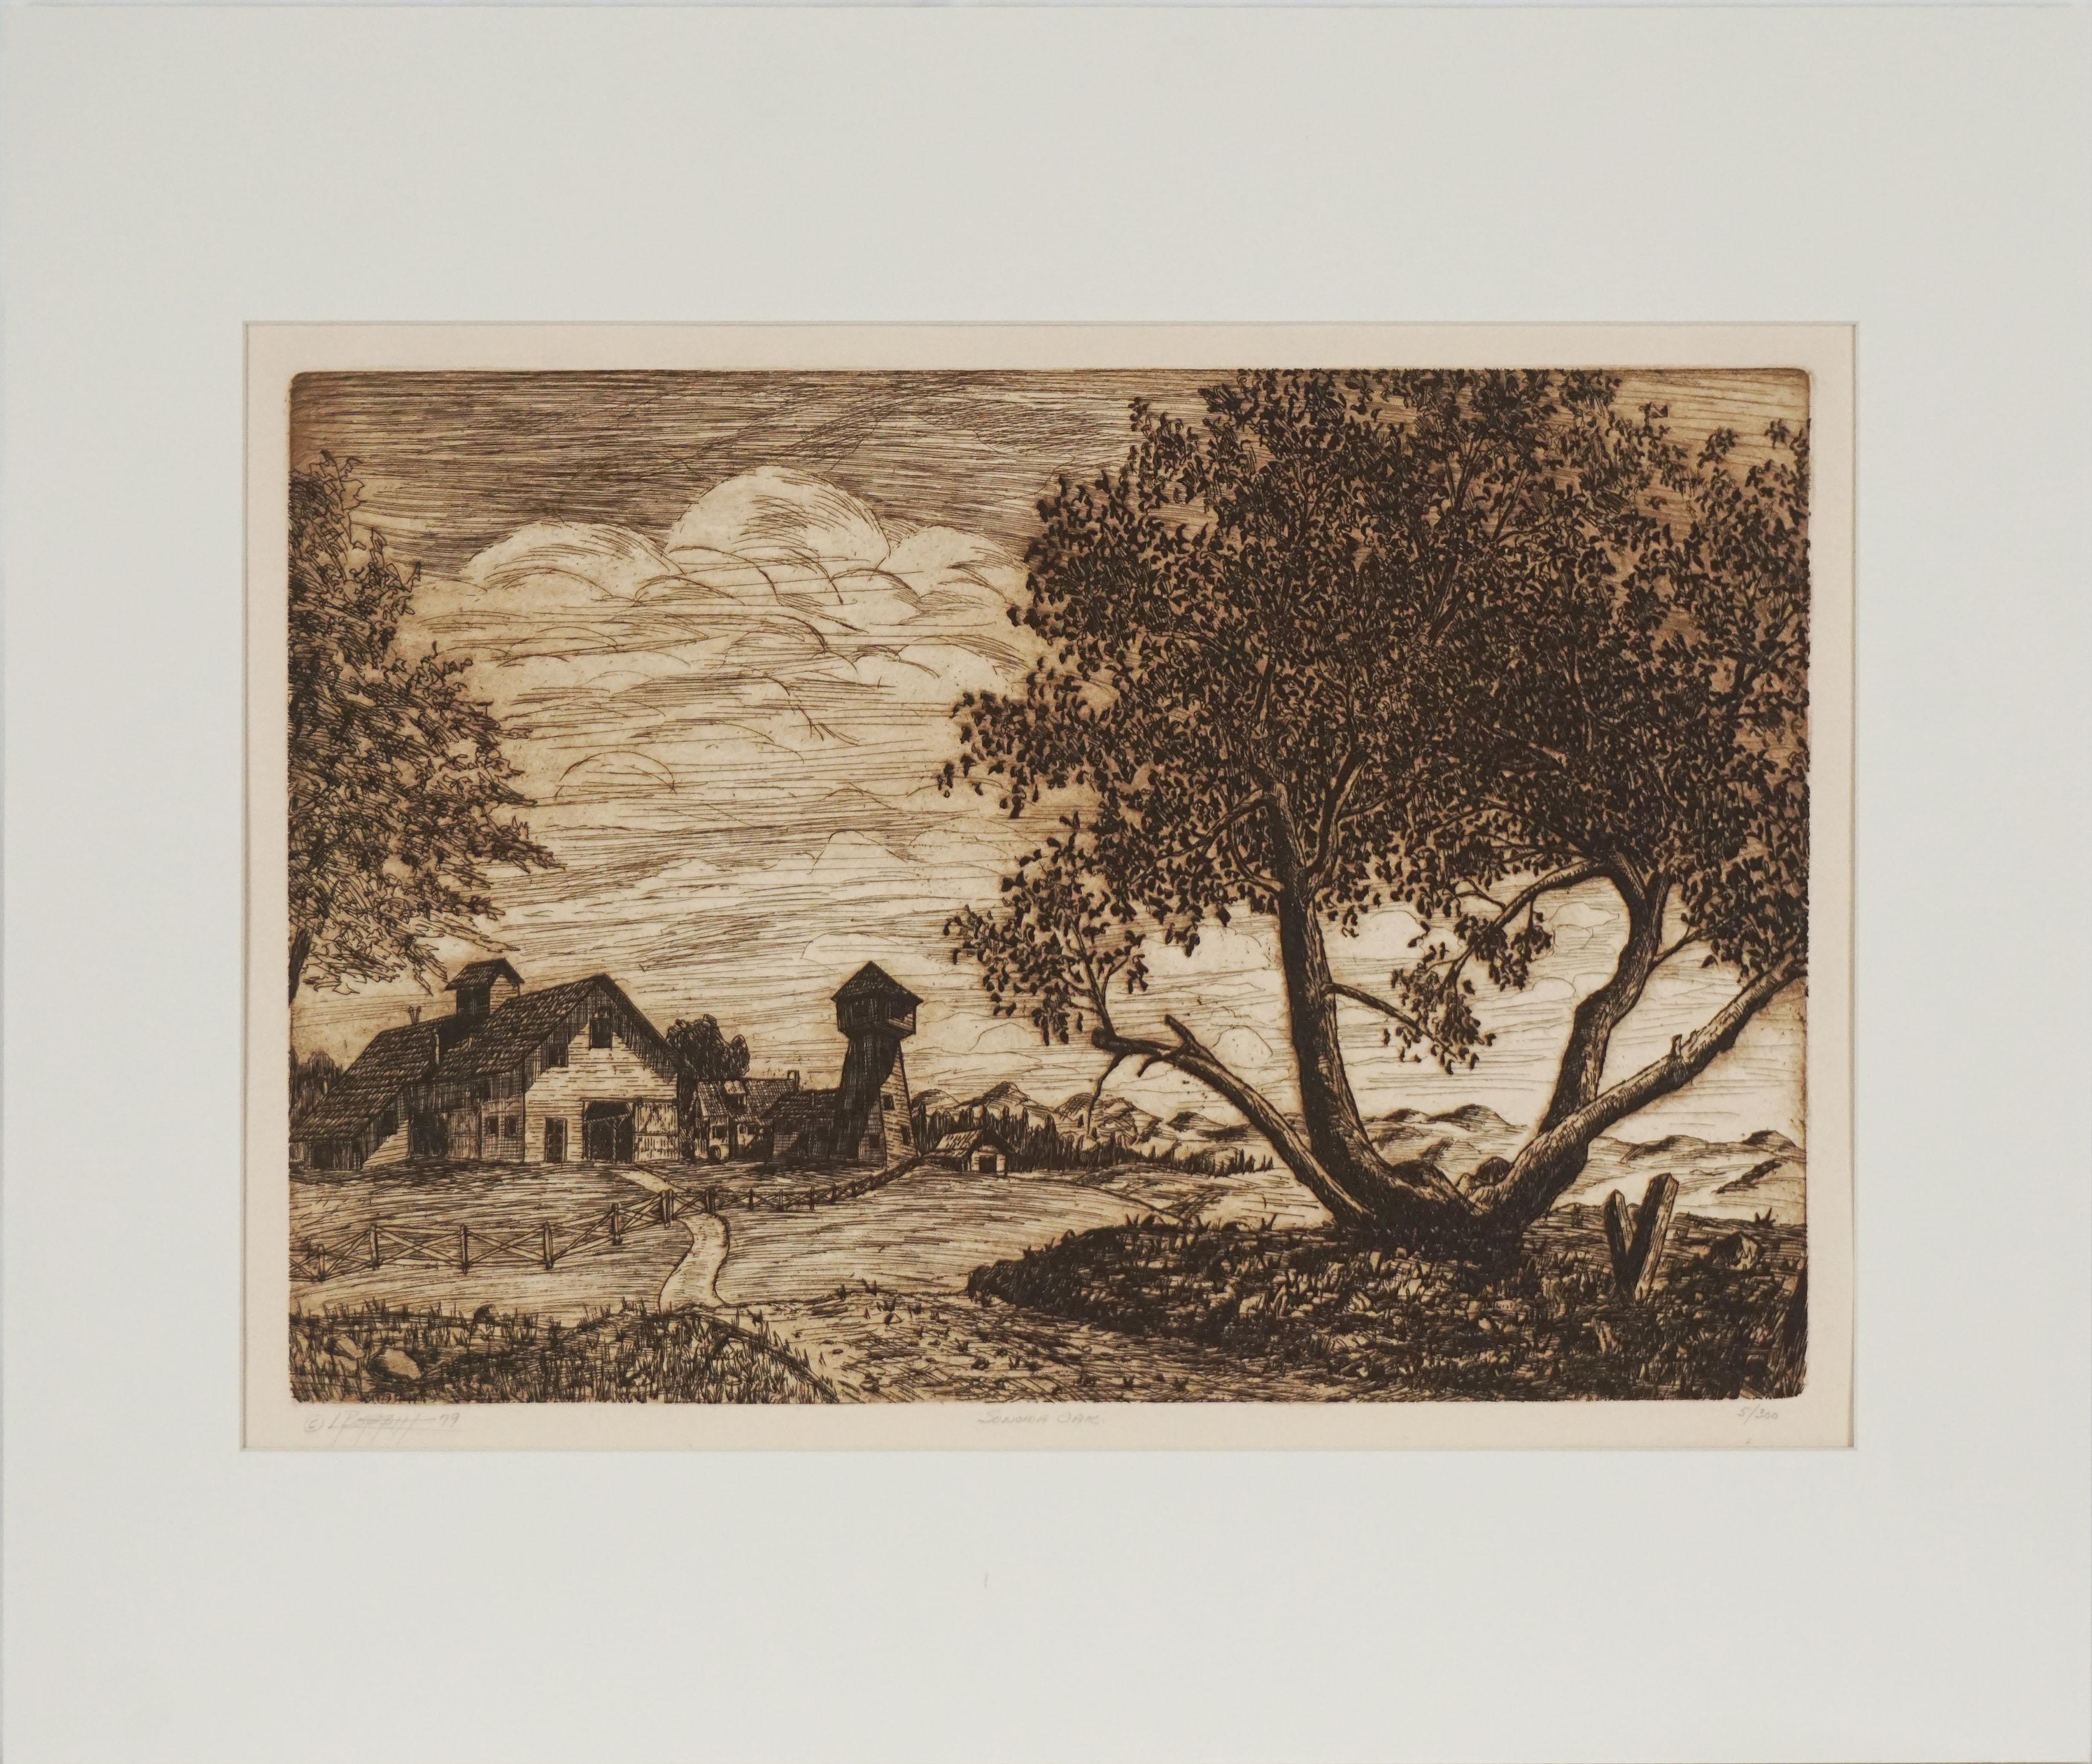 Vintage California Wine Country Etching - 